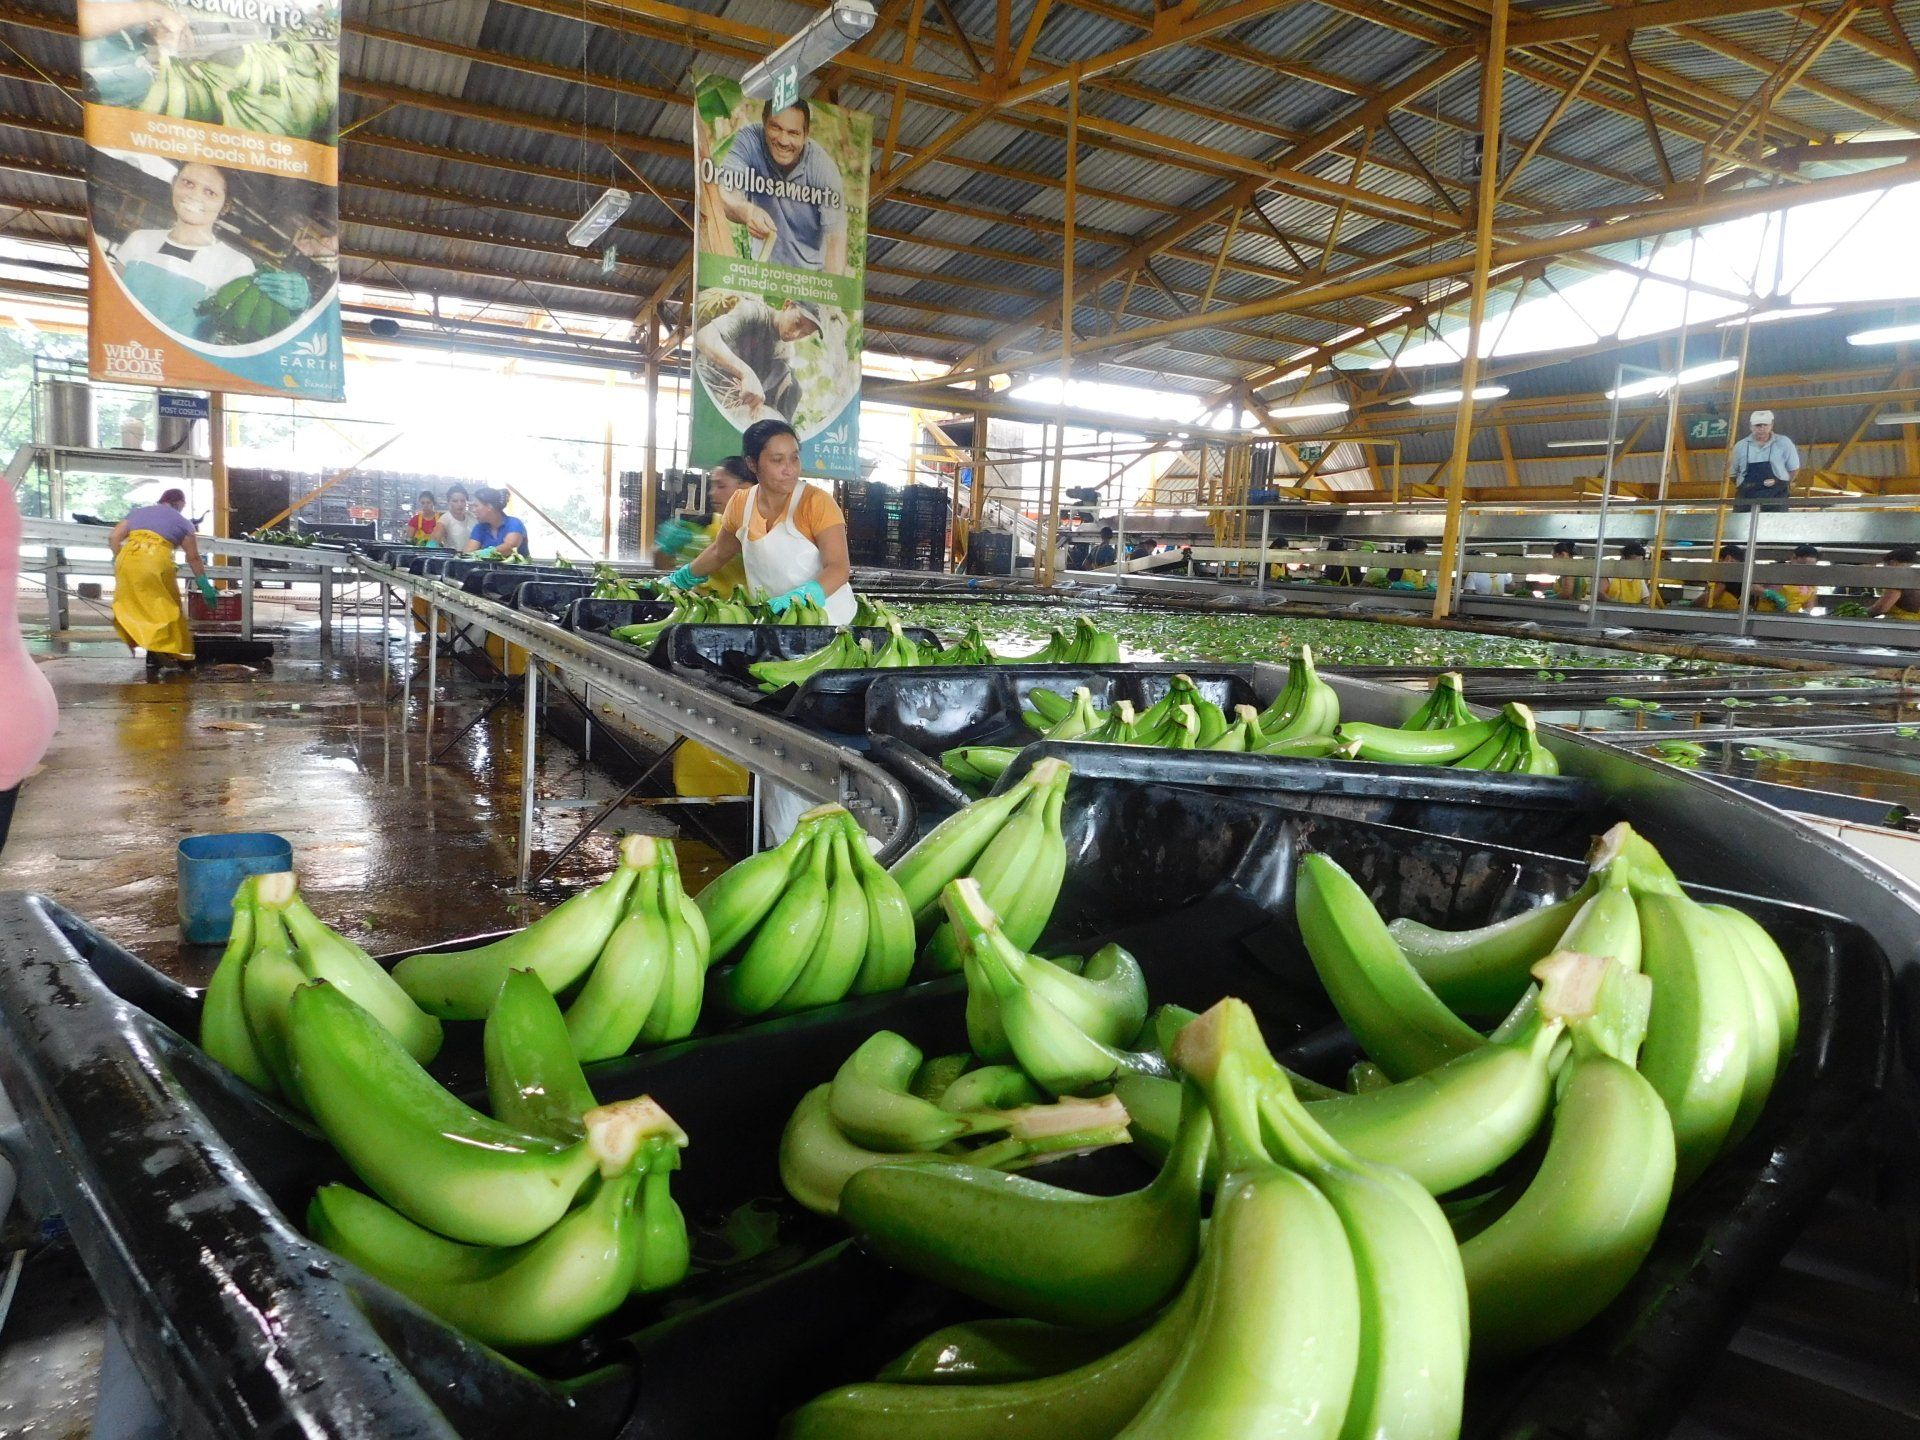 A bunch of green bananas are in a black container